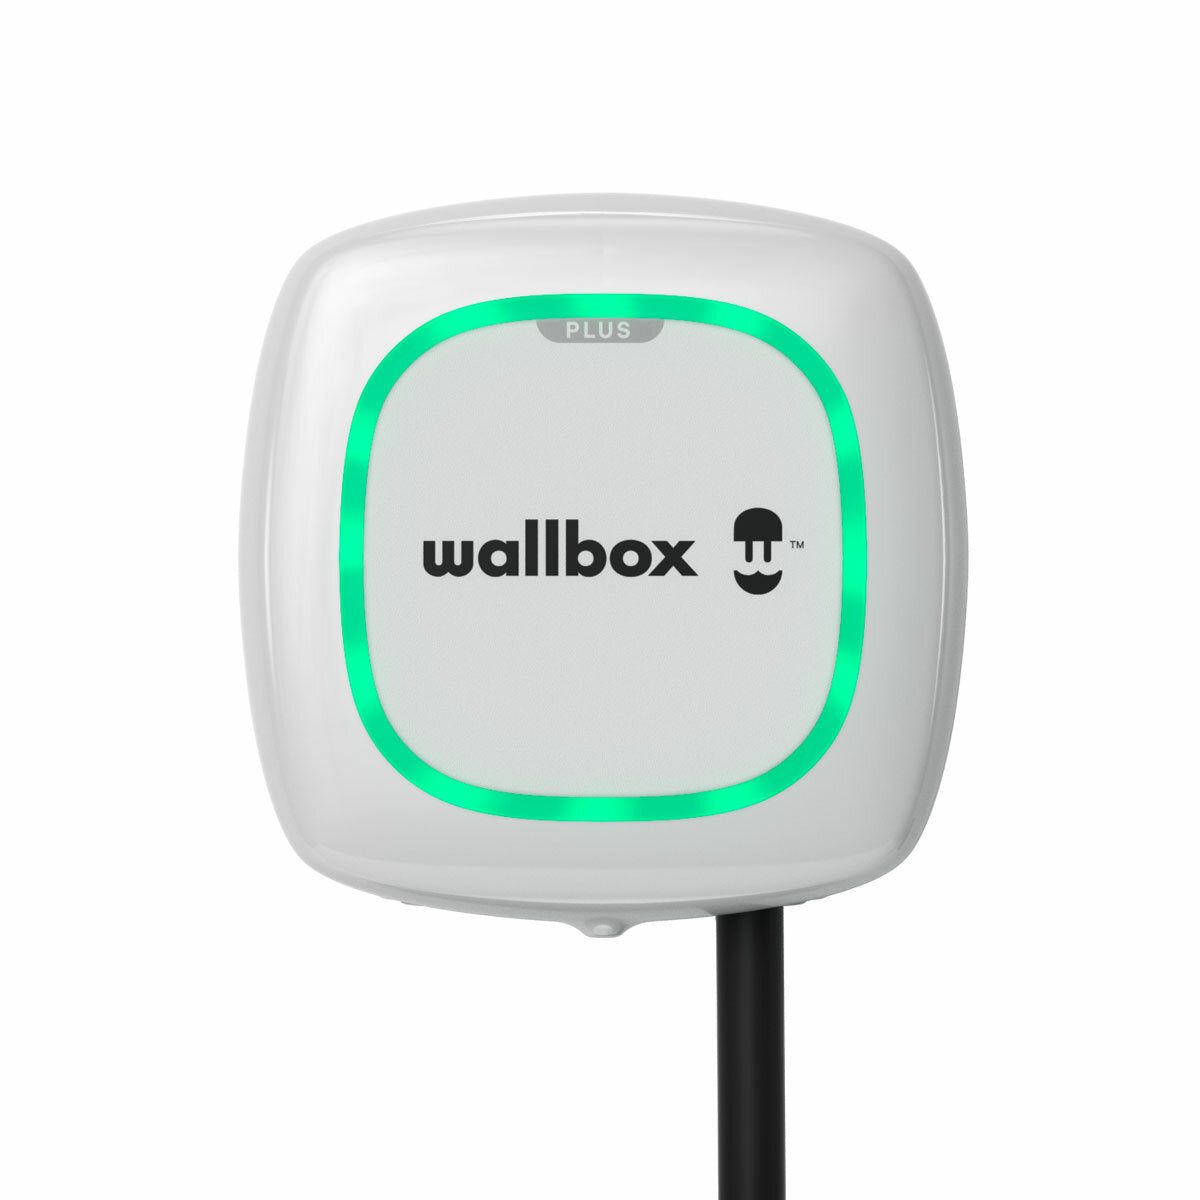 Wallbox Pulsar Plus Type 2 electric car charging station with 5 m cable - 7.4 kW